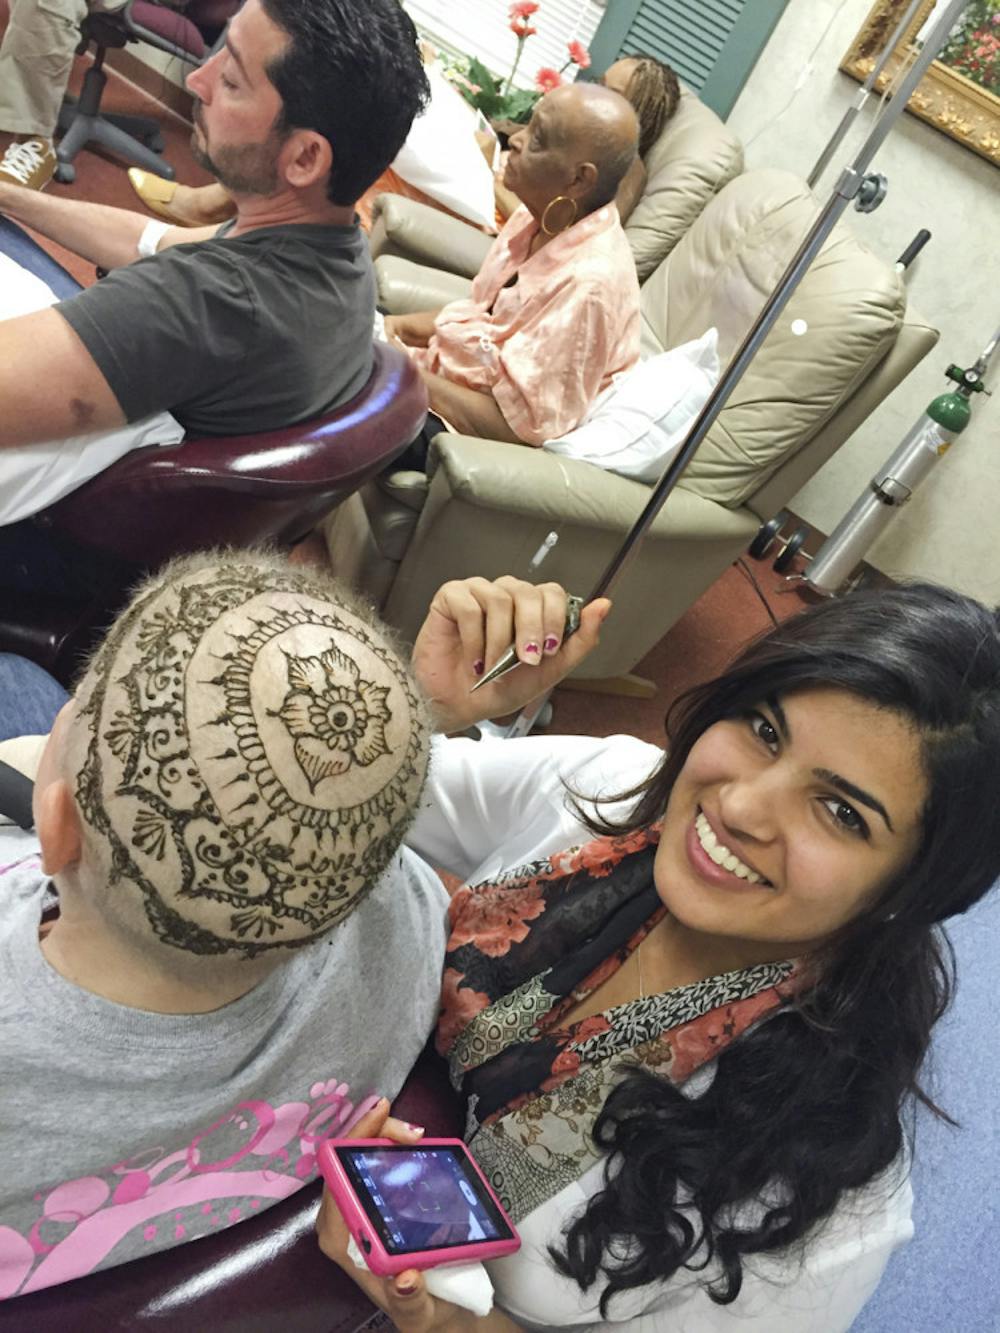 <p class="p1">UF religion senior Jeena Kar, 21, paints henna on a woman’s head during a cancer support group session at a private medical practice in Orlando. </p>